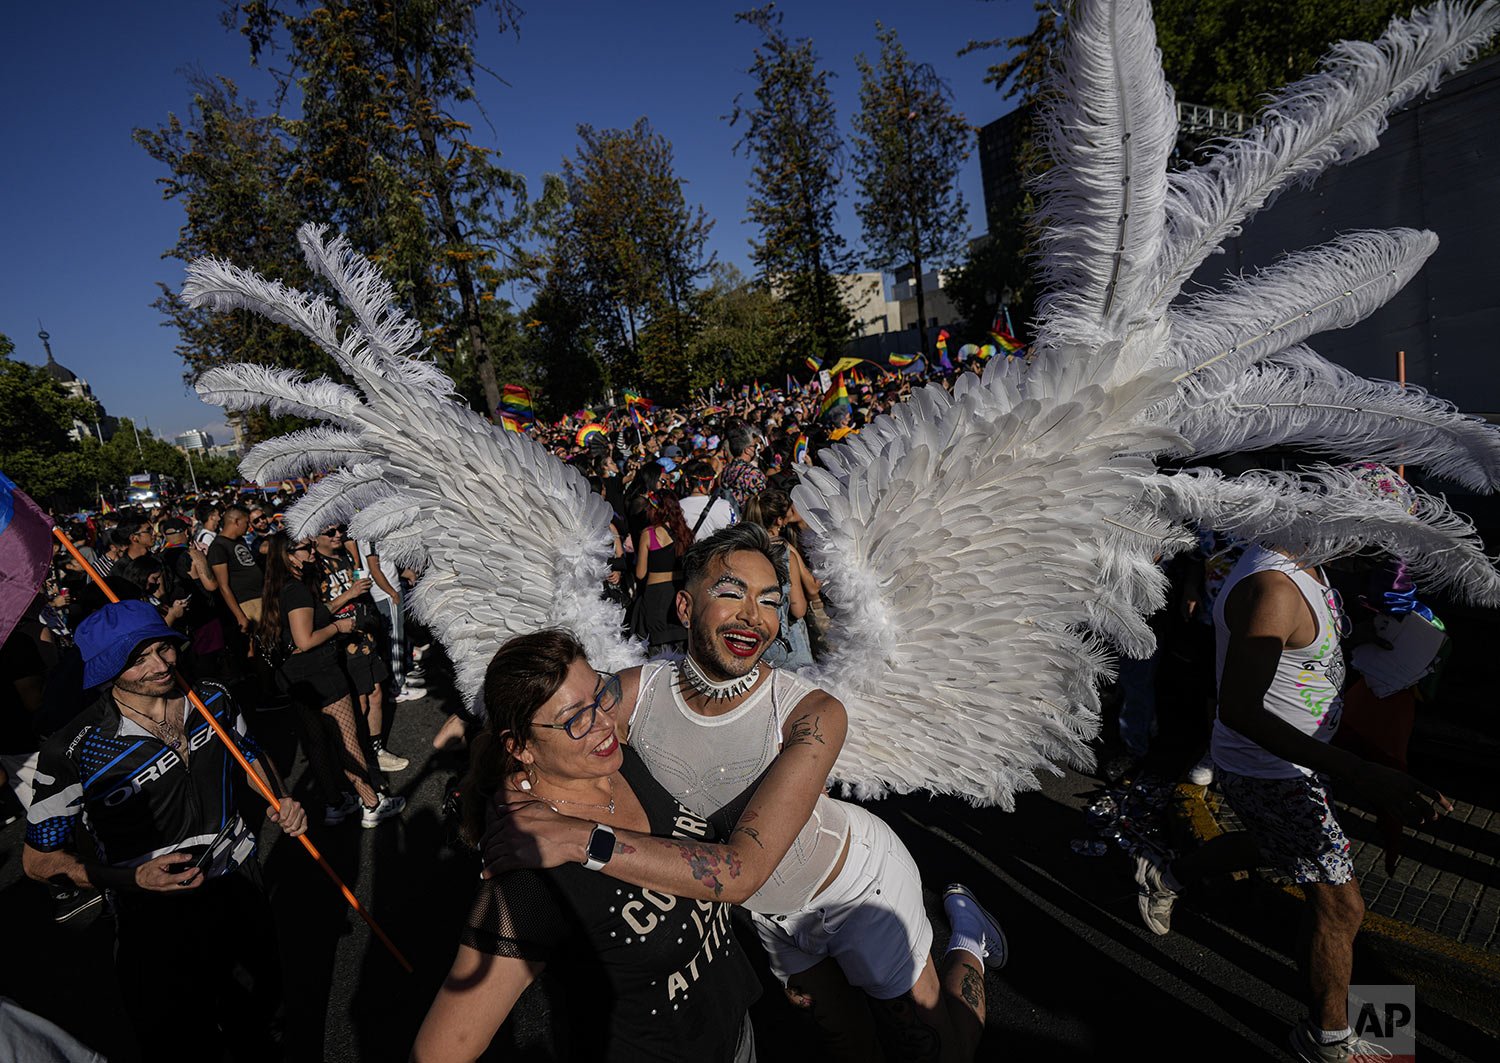  Freddy Castillo, wearing angel wings, poses for a photo during the annual Gay Pride parade in Santiago, Chile, Nov. 13, 2021. (AP Photo/Esteban Felix) 